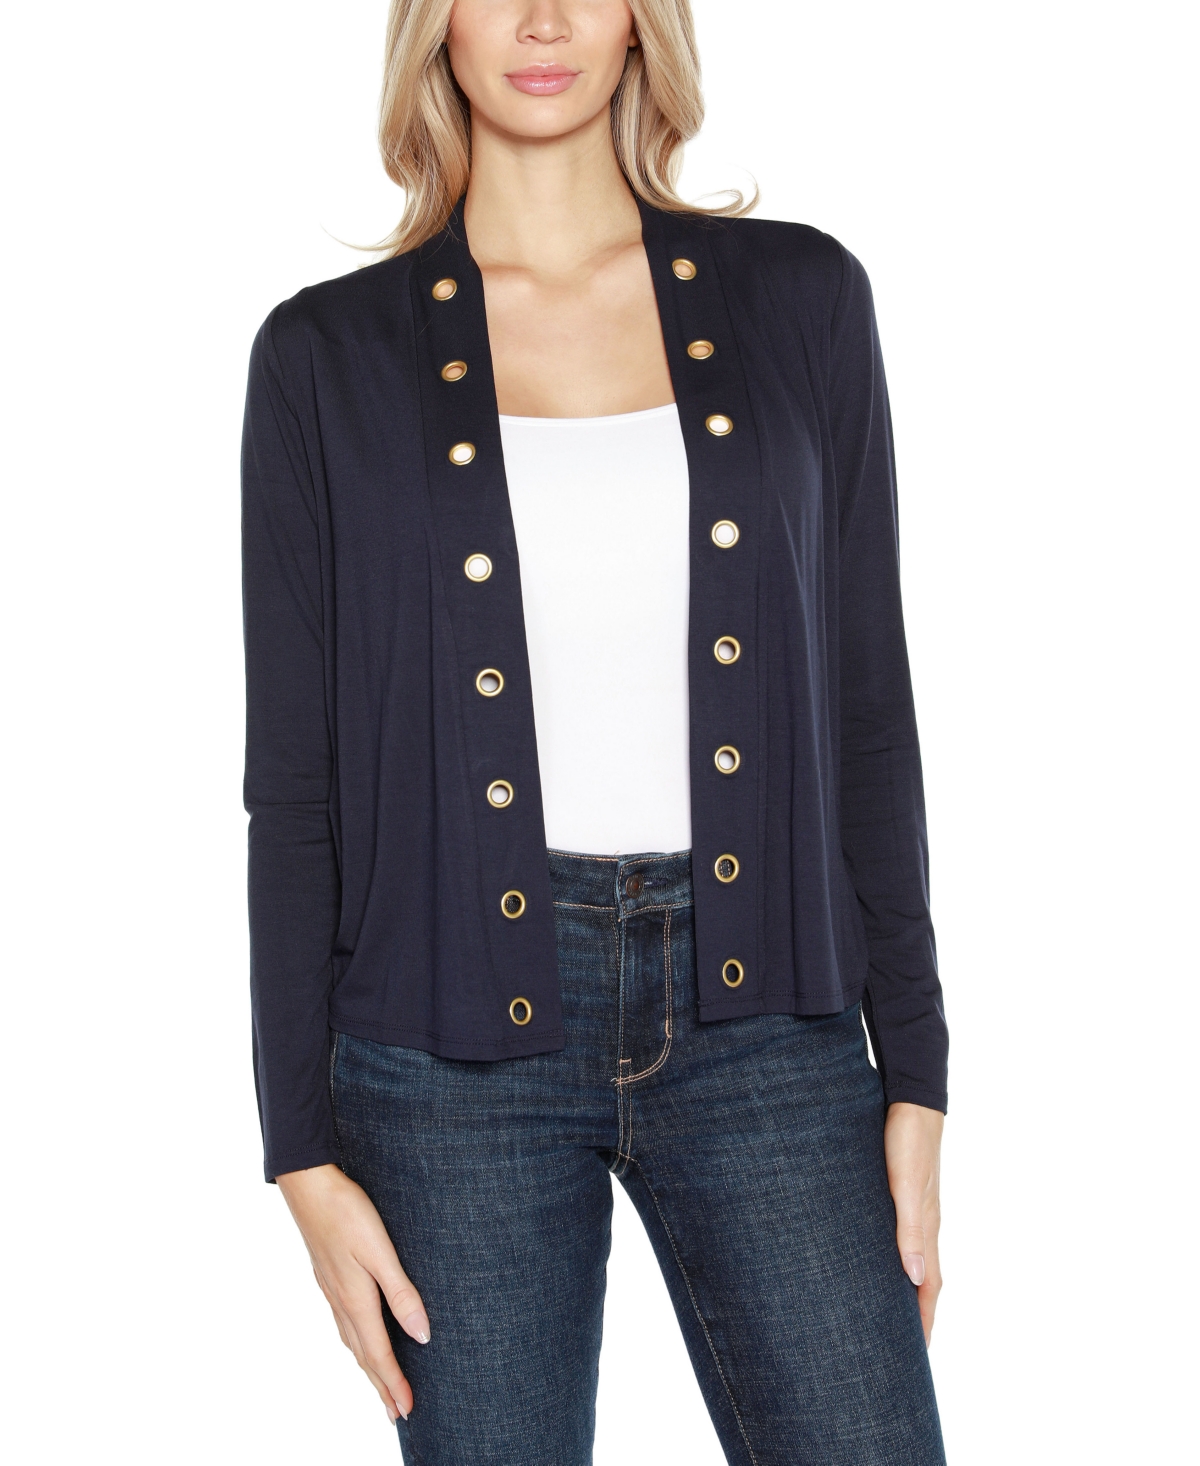 Women's Grommet Detail Cropped Knit Cardigan - Hgry/gld